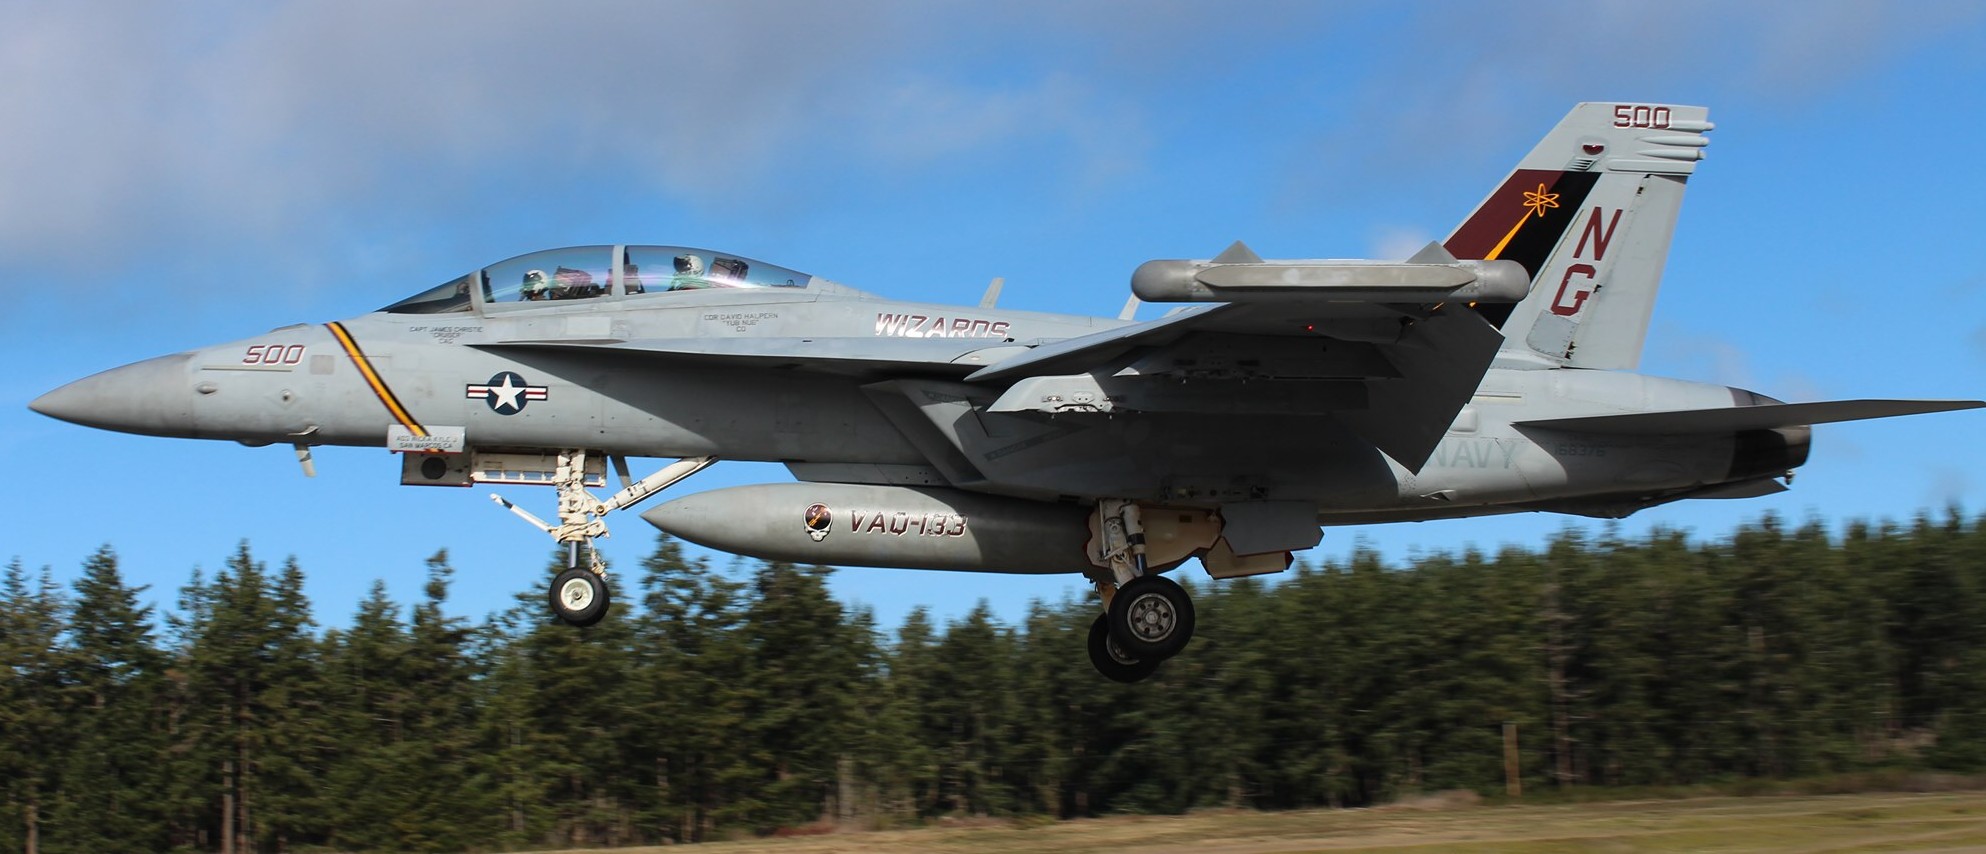 vaq-133 wizards electronic attack squadron vaqron us navy boeing ea-18g growler nas whidbey island 61